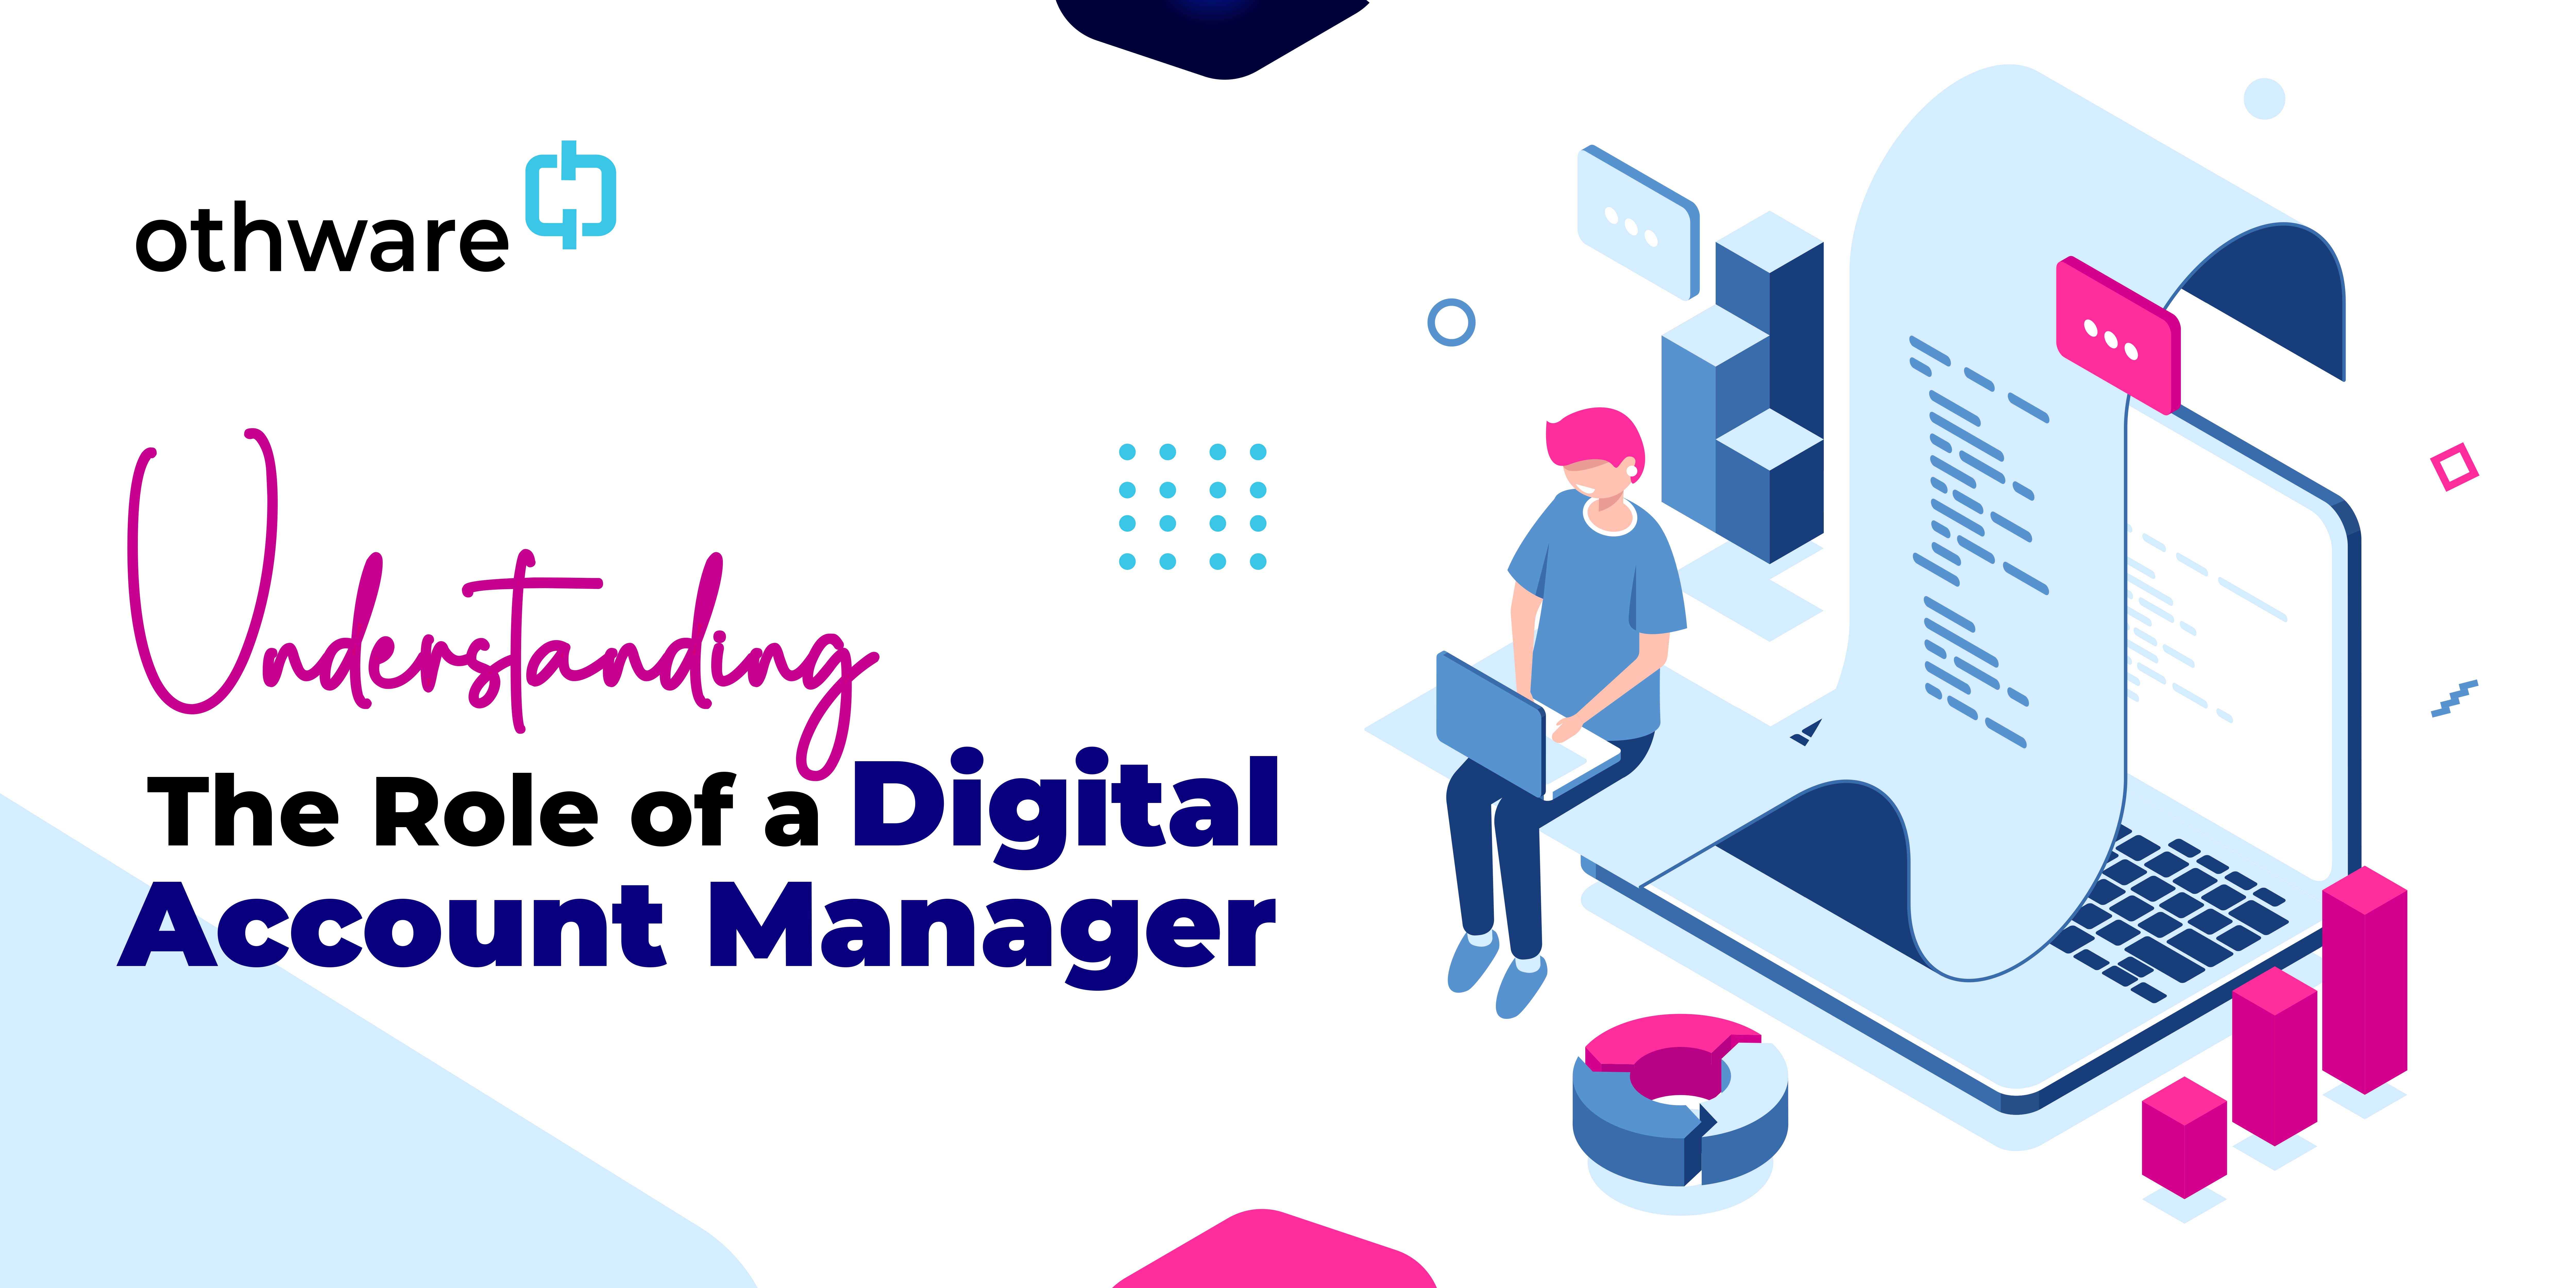 Read on to learn more about the roles and responsibilities of a digital account manager.